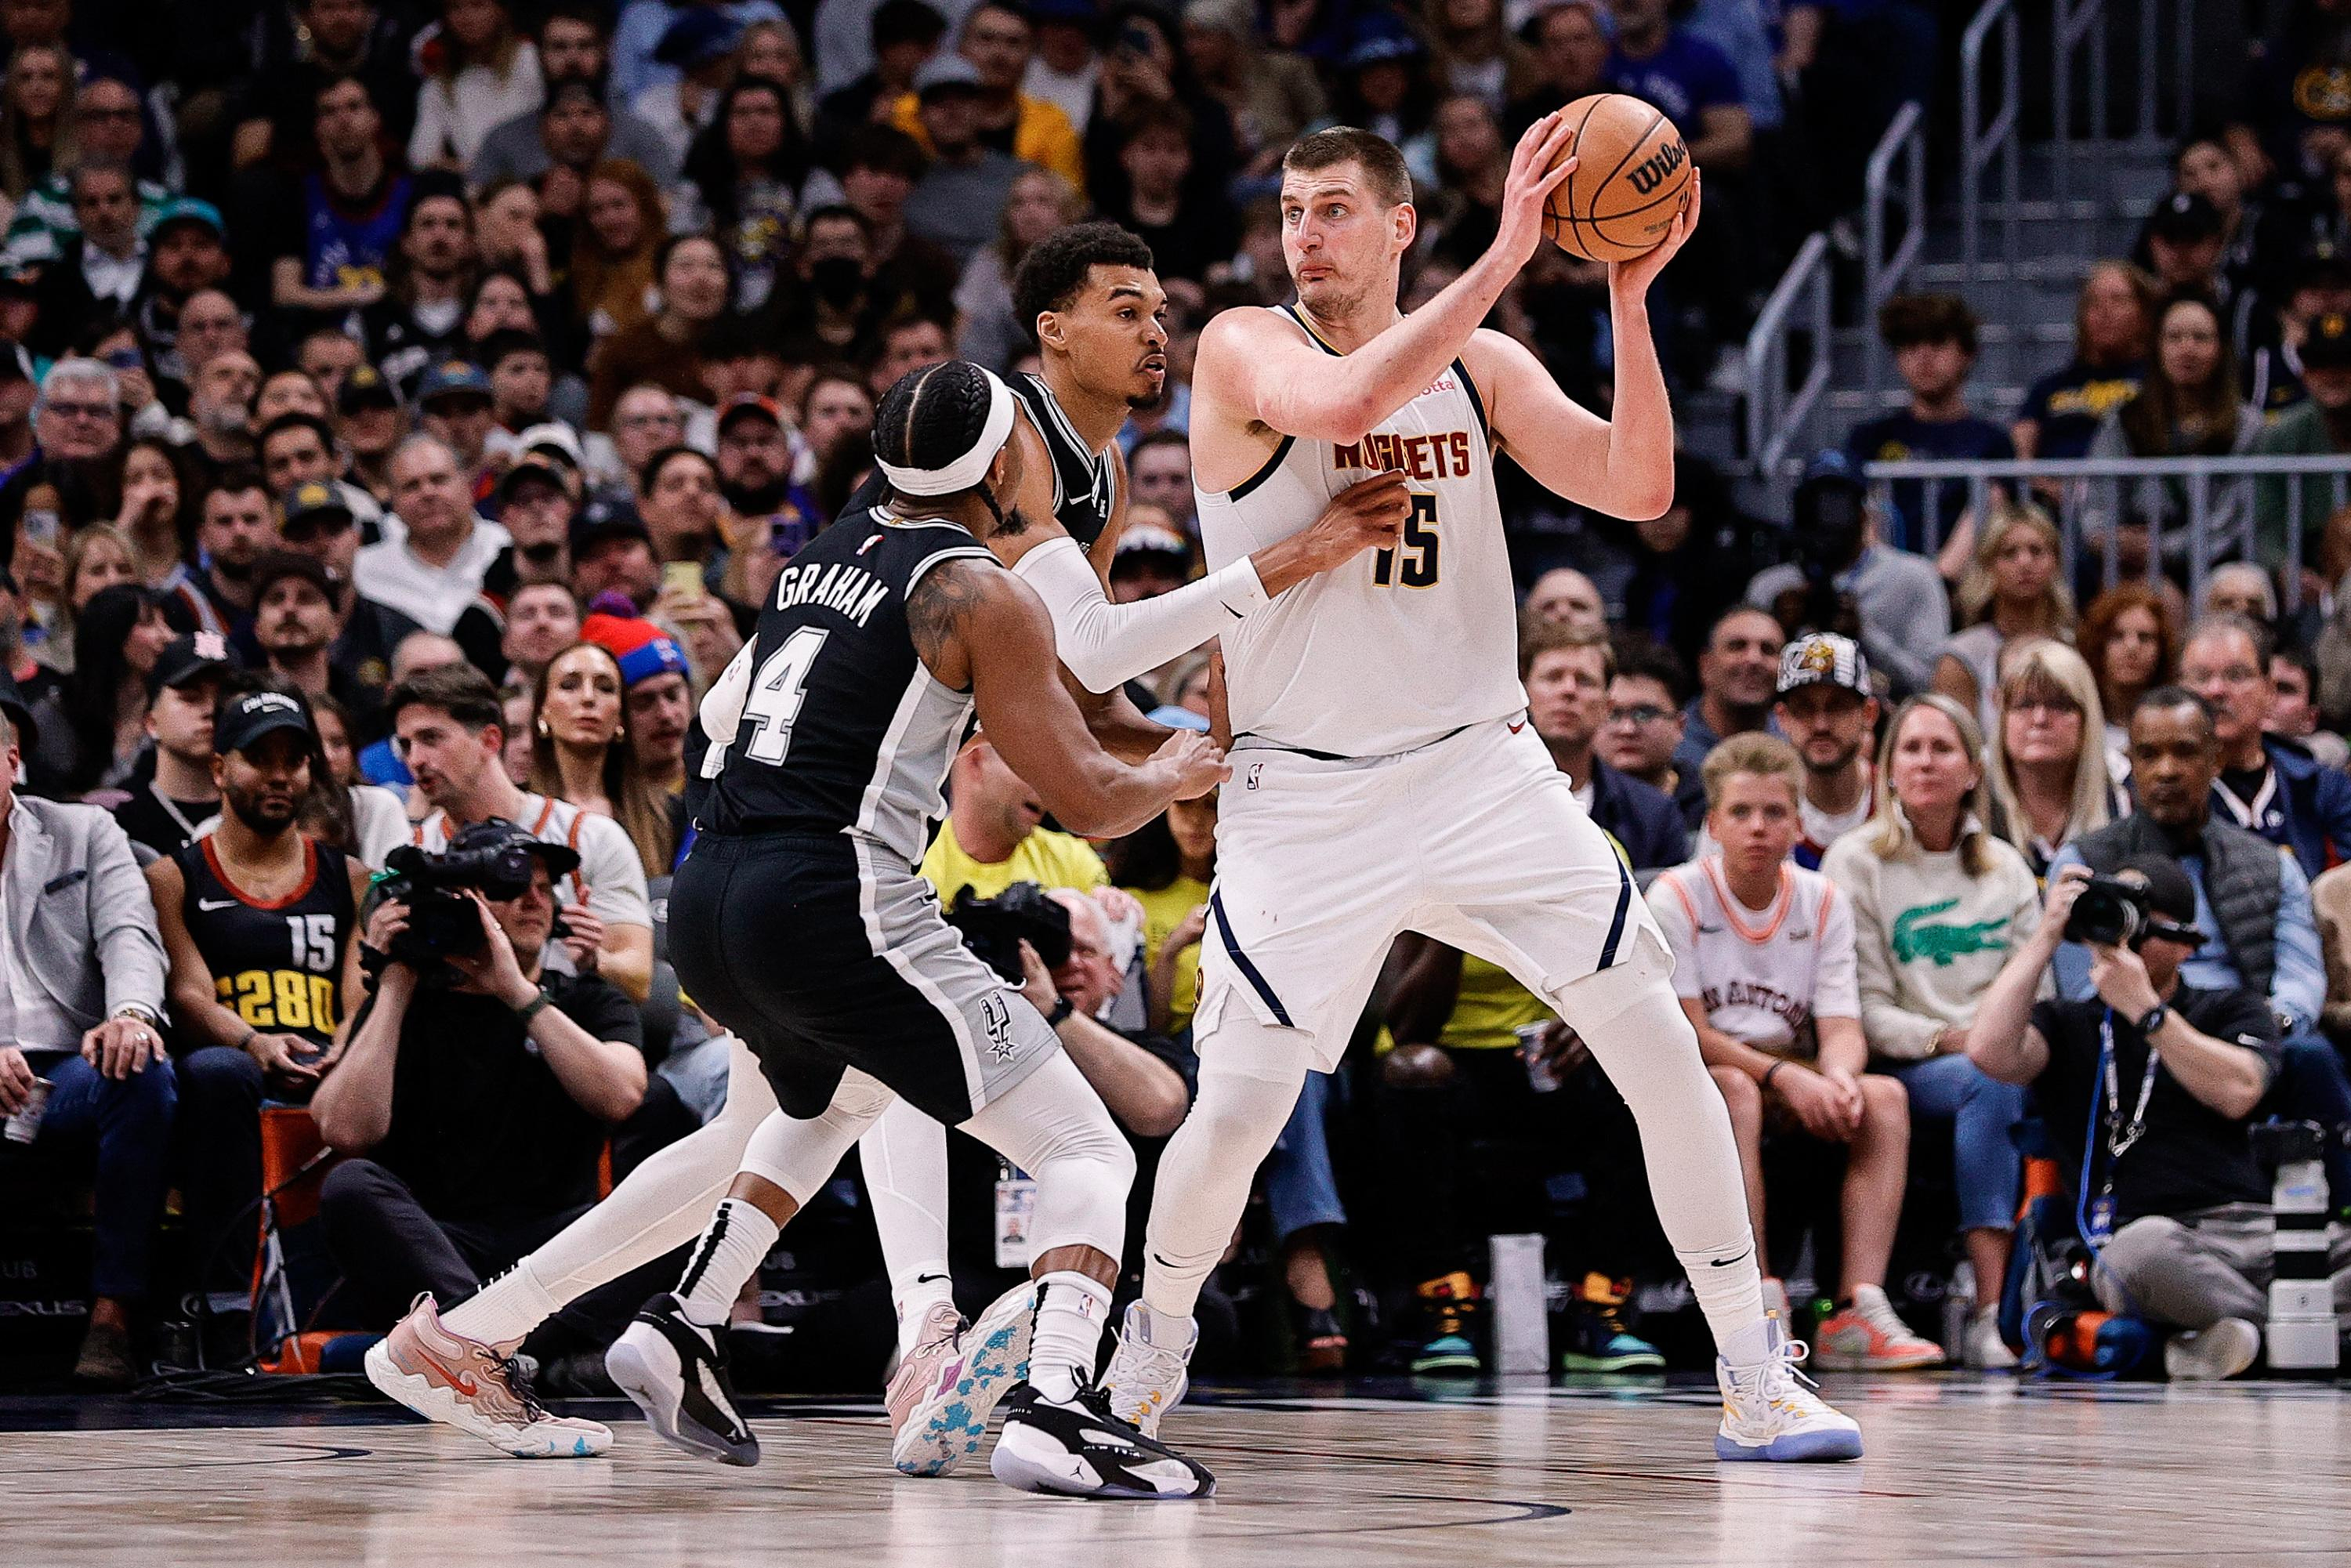 New York derby between the Knicks and the Nets, Wembanyama against Jokic: the program of the night in the NBA